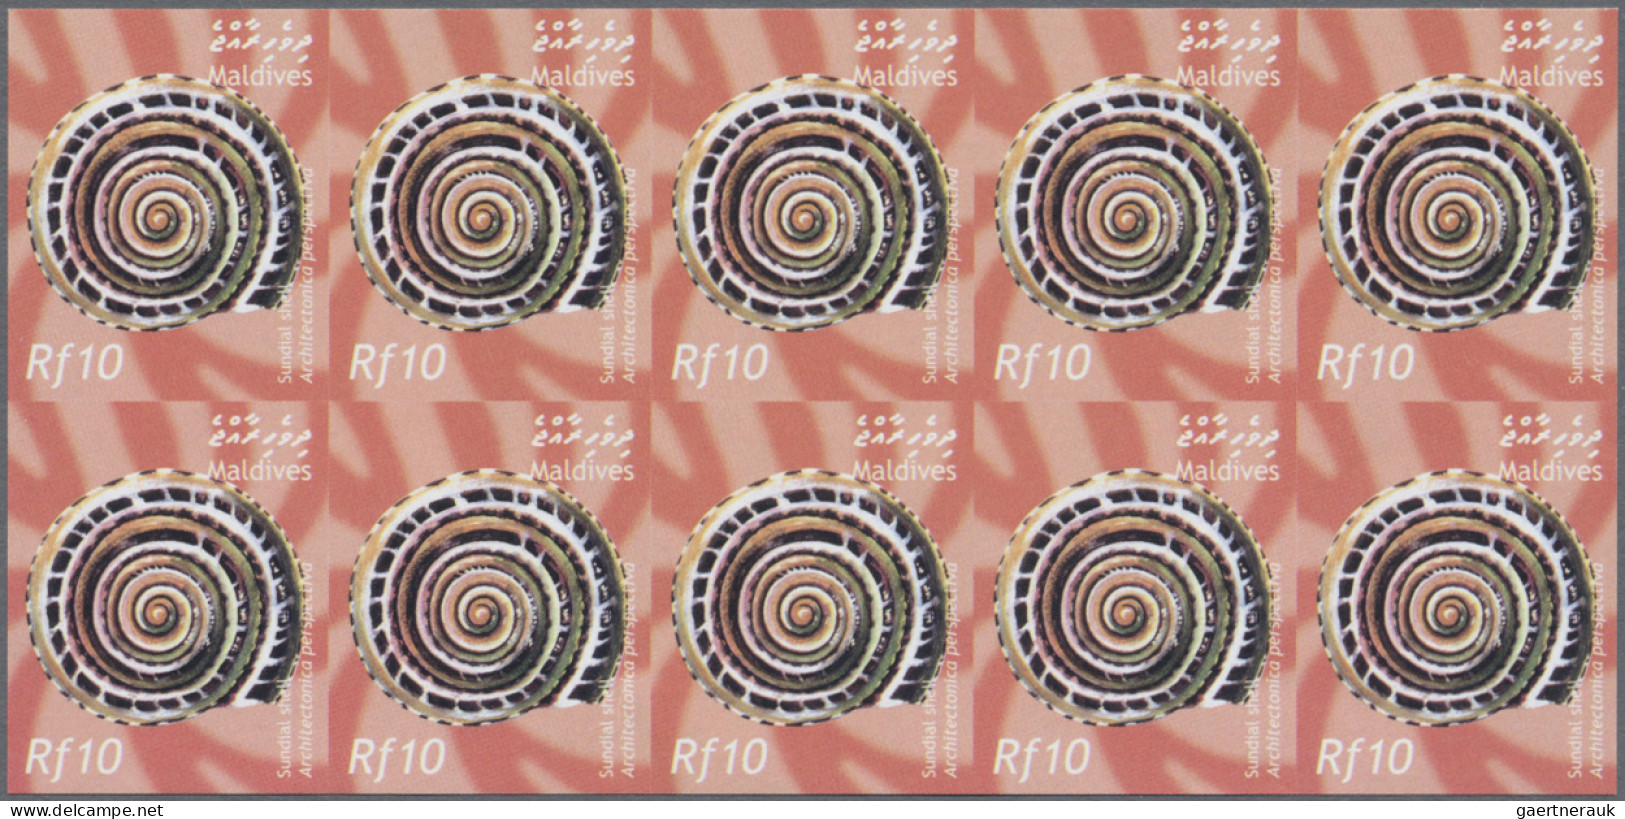 Maldives: 1998/2009. Collection containing 785 IMPERFORATE stamps and 23 IMPERFO